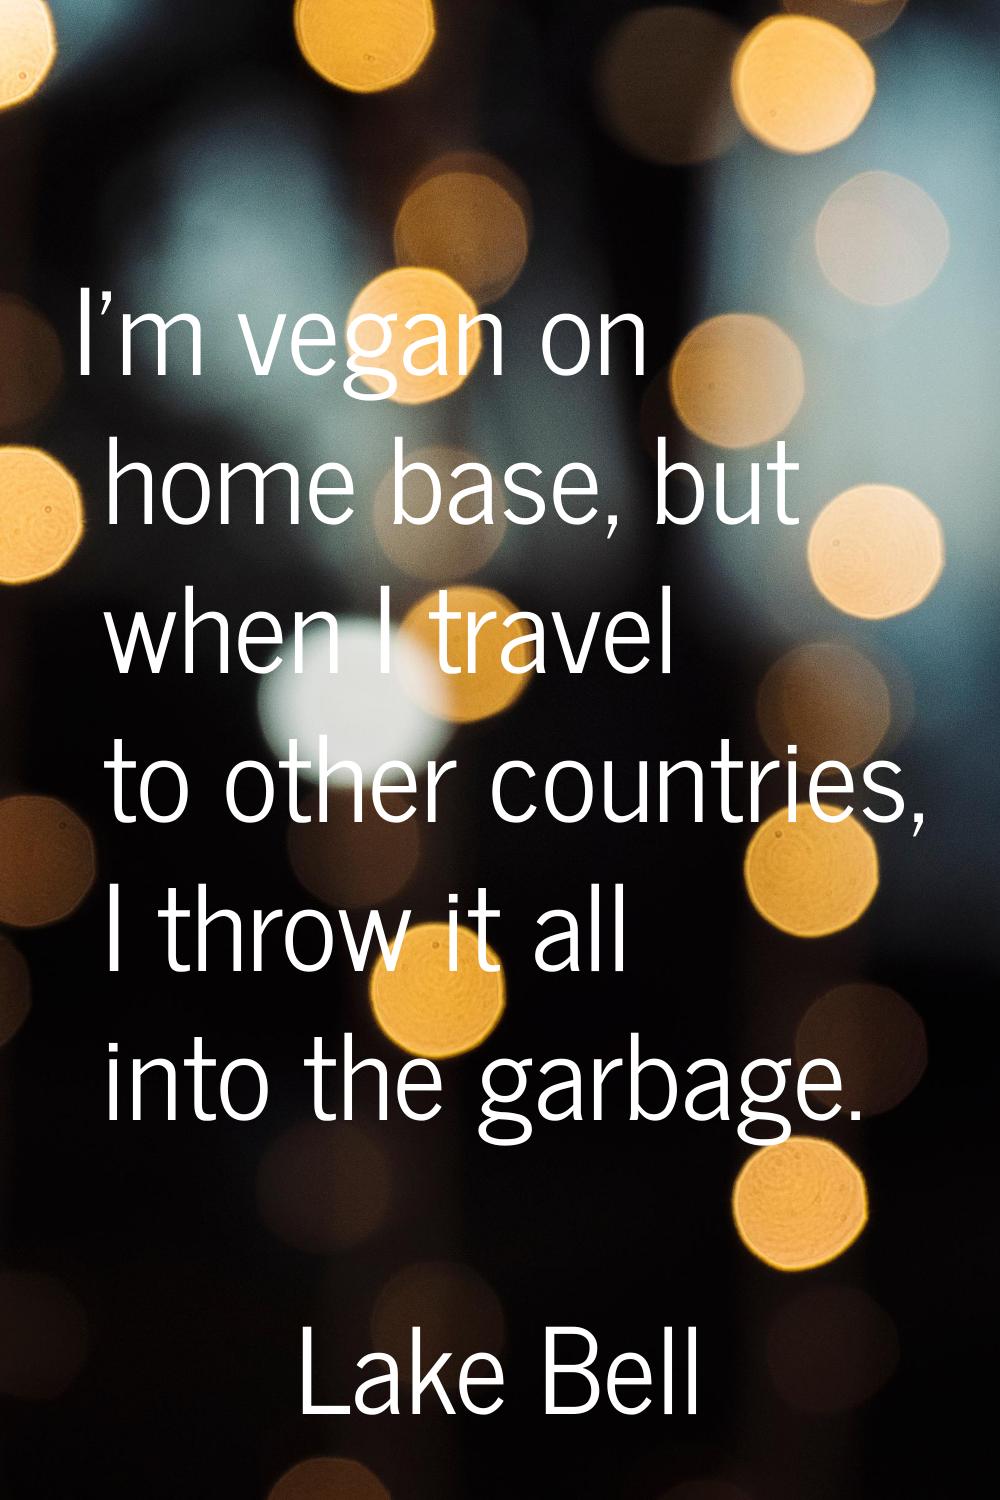 I'm vegan on home base, but when I travel to other countries, I throw it all into the garbage.